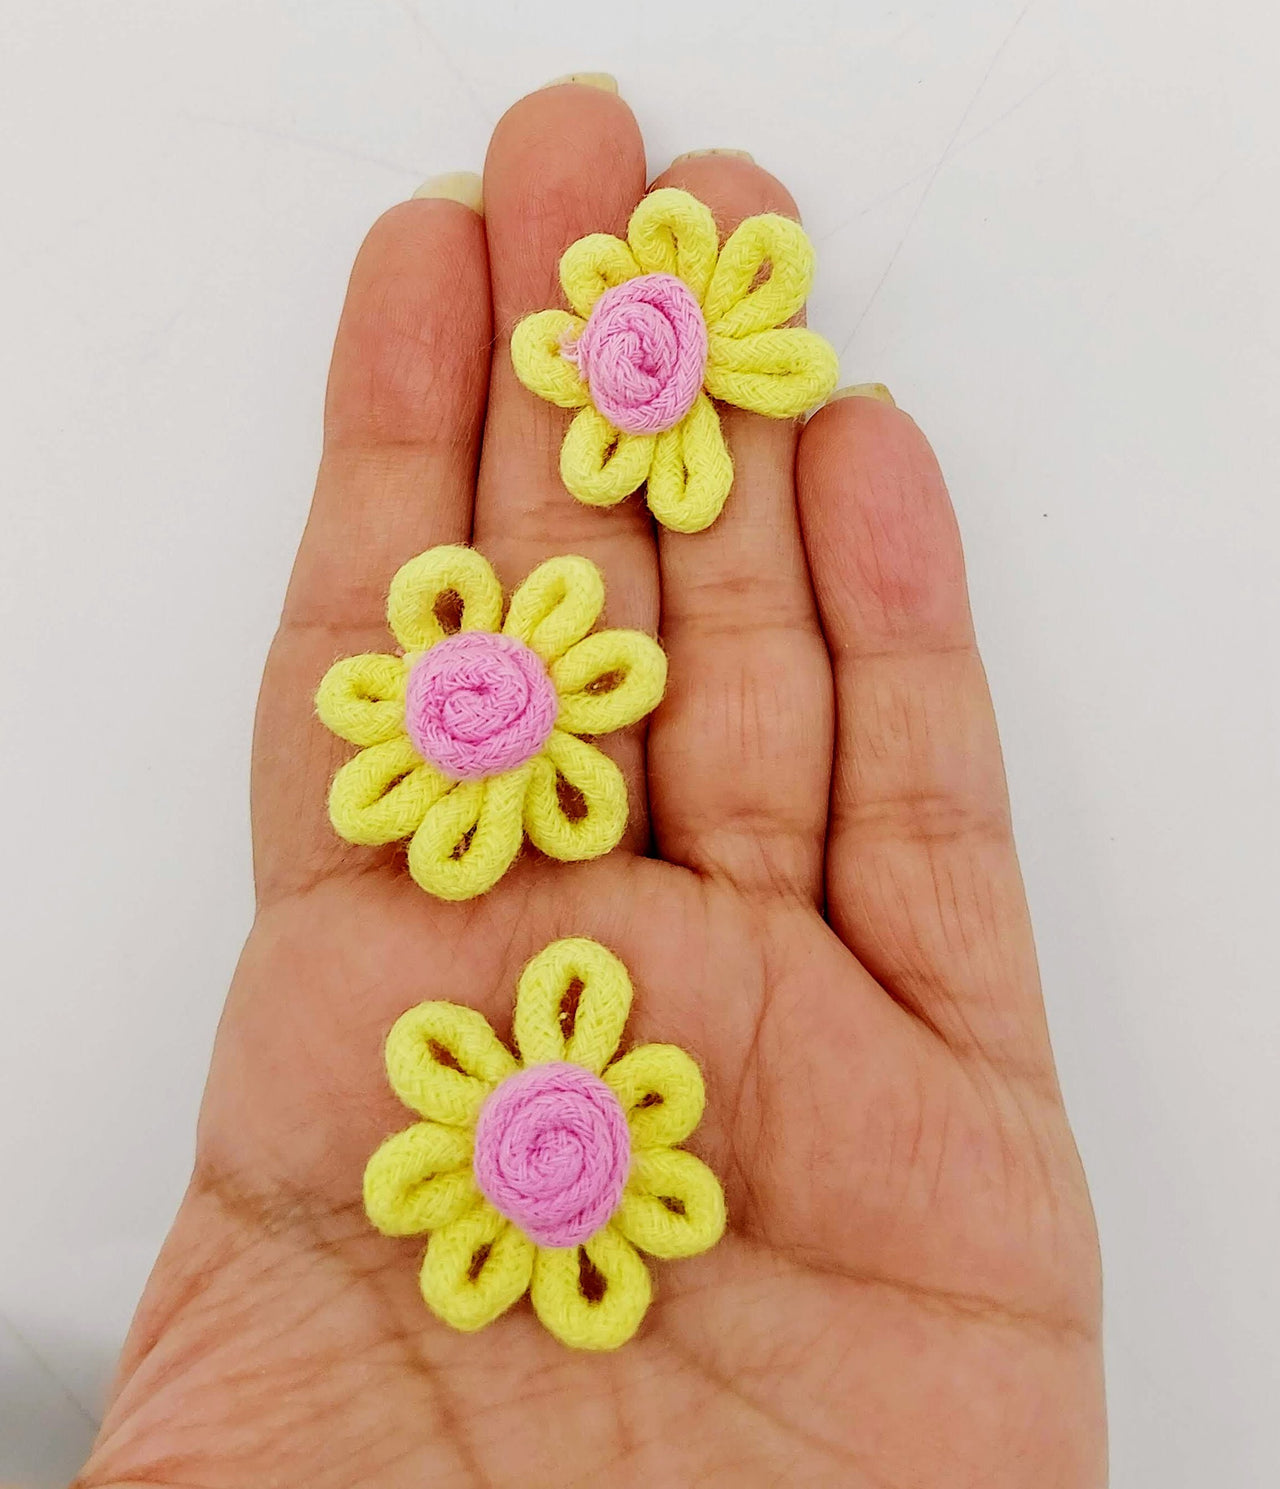 Yellow and Pink Floral Applique, Flower Motifs x 5